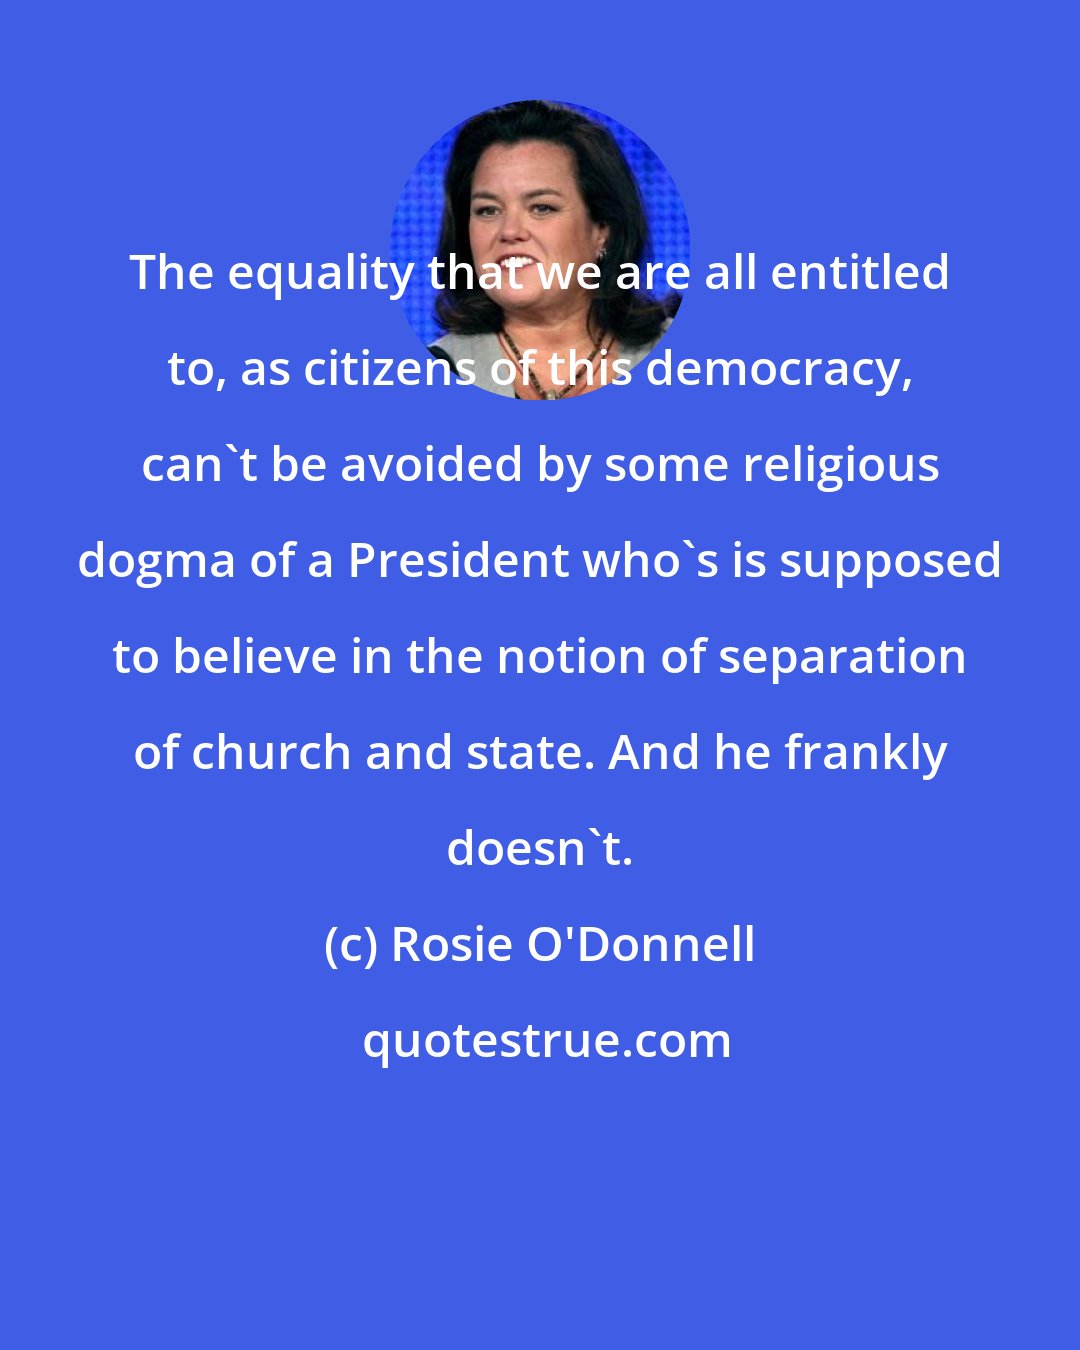 Rosie O'Donnell: The equality that we are all entitled to, as citizens of this democracy, can't be avoided by some religious dogma of a President who's is supposed to believe in the notion of separation of church and state. And he frankly doesn't.